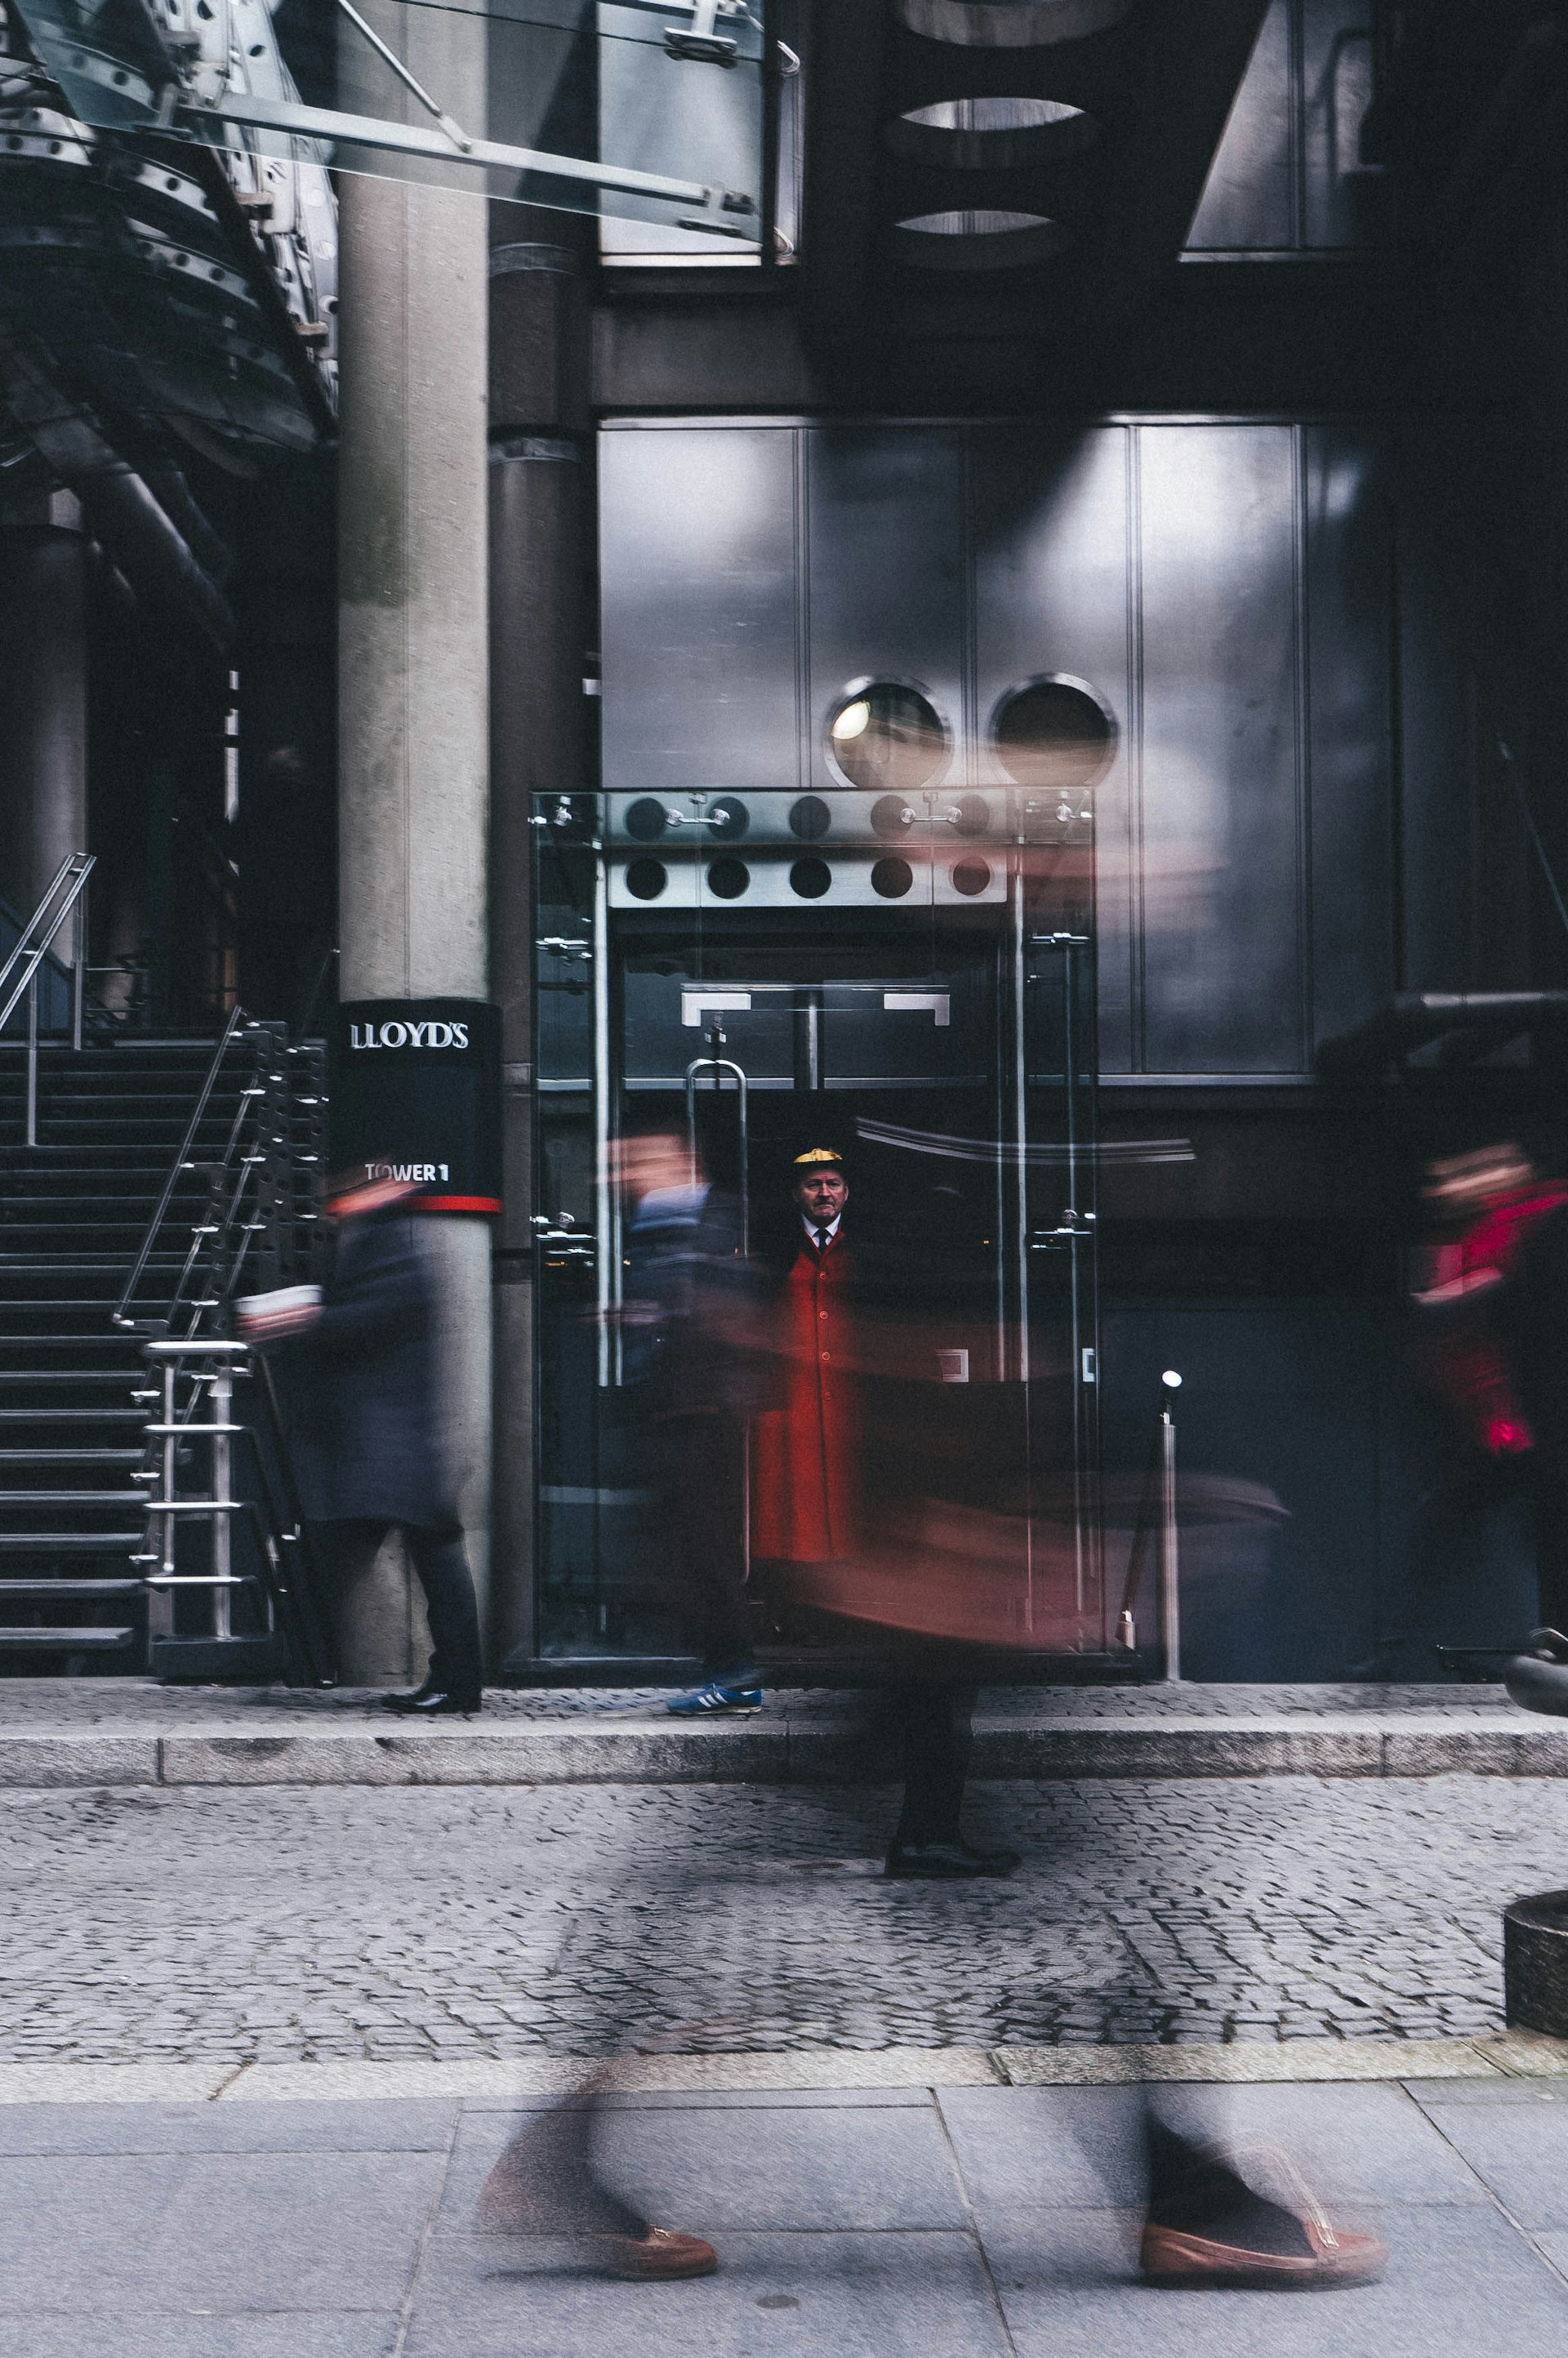 Photo of a doorman standing still in front of Lloyds of London with blurred images of other people walking quickly by.